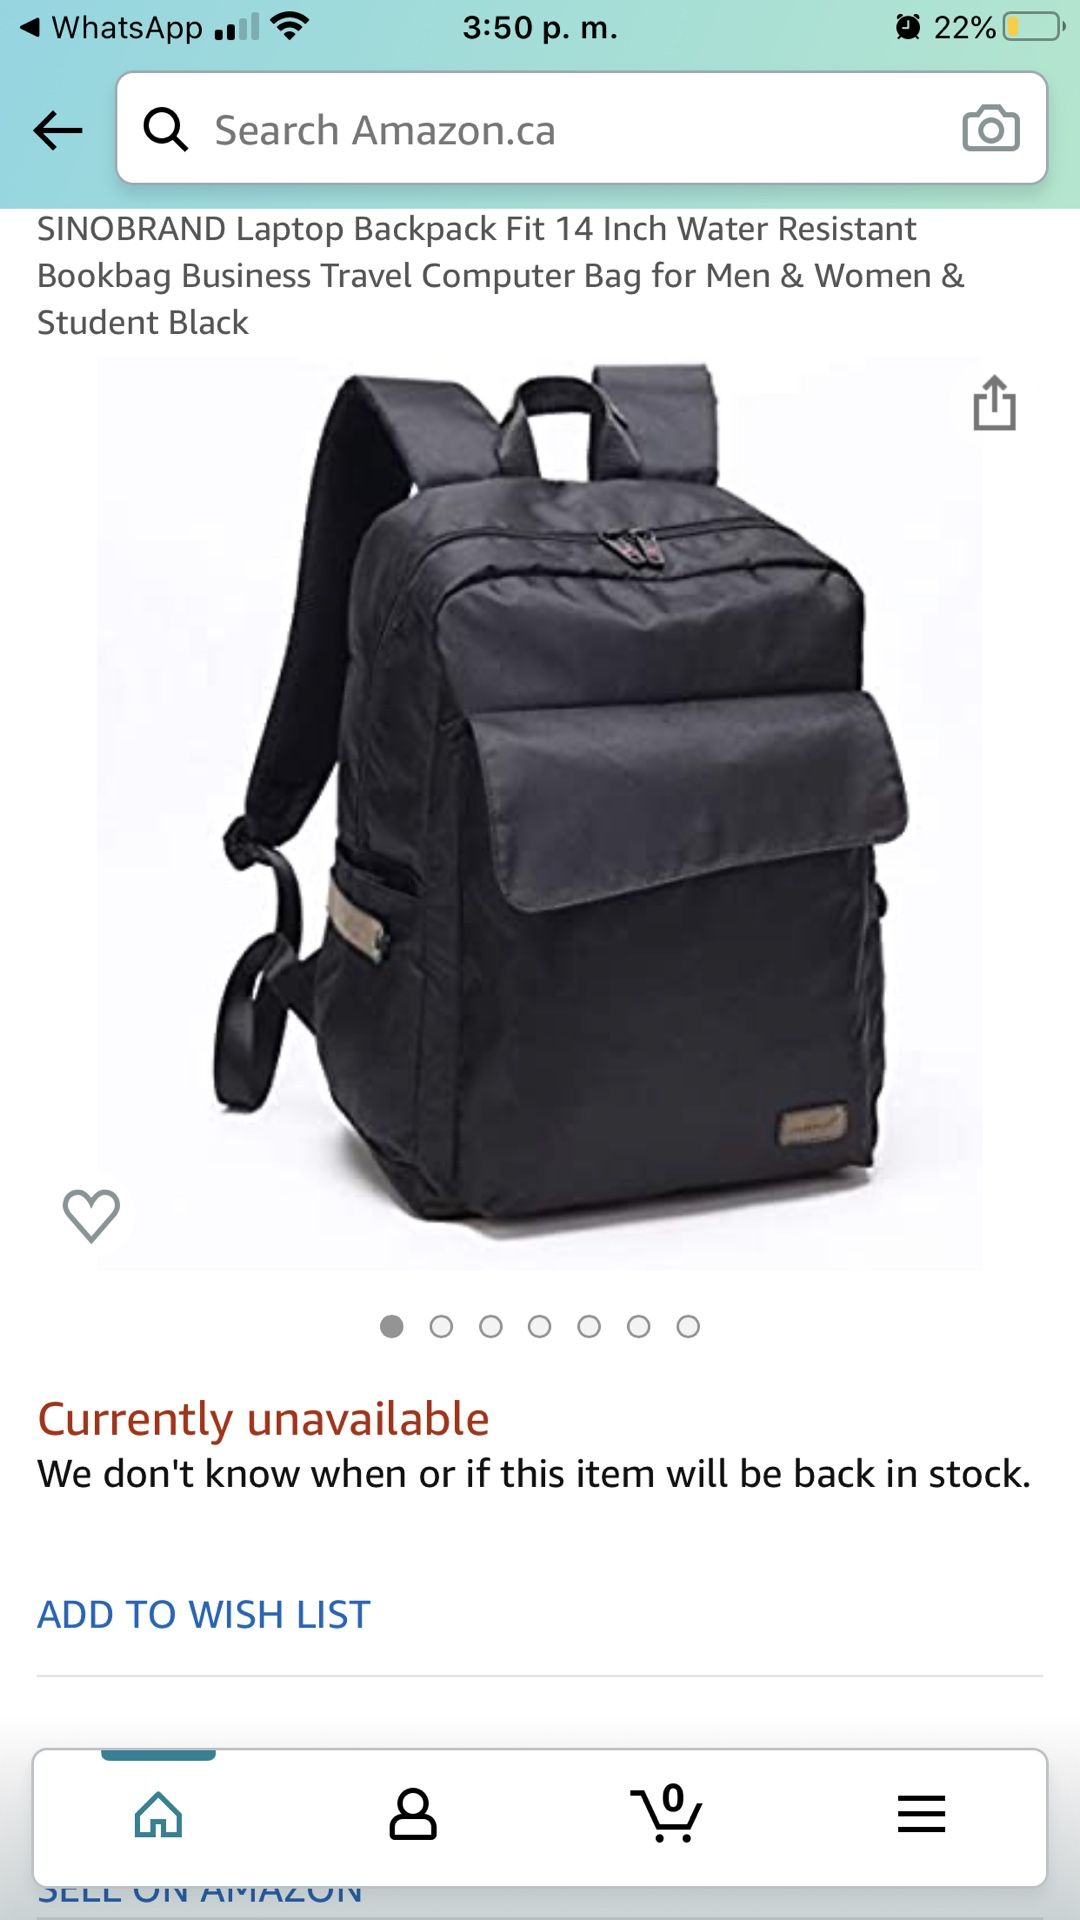 14" inch laptop backpack